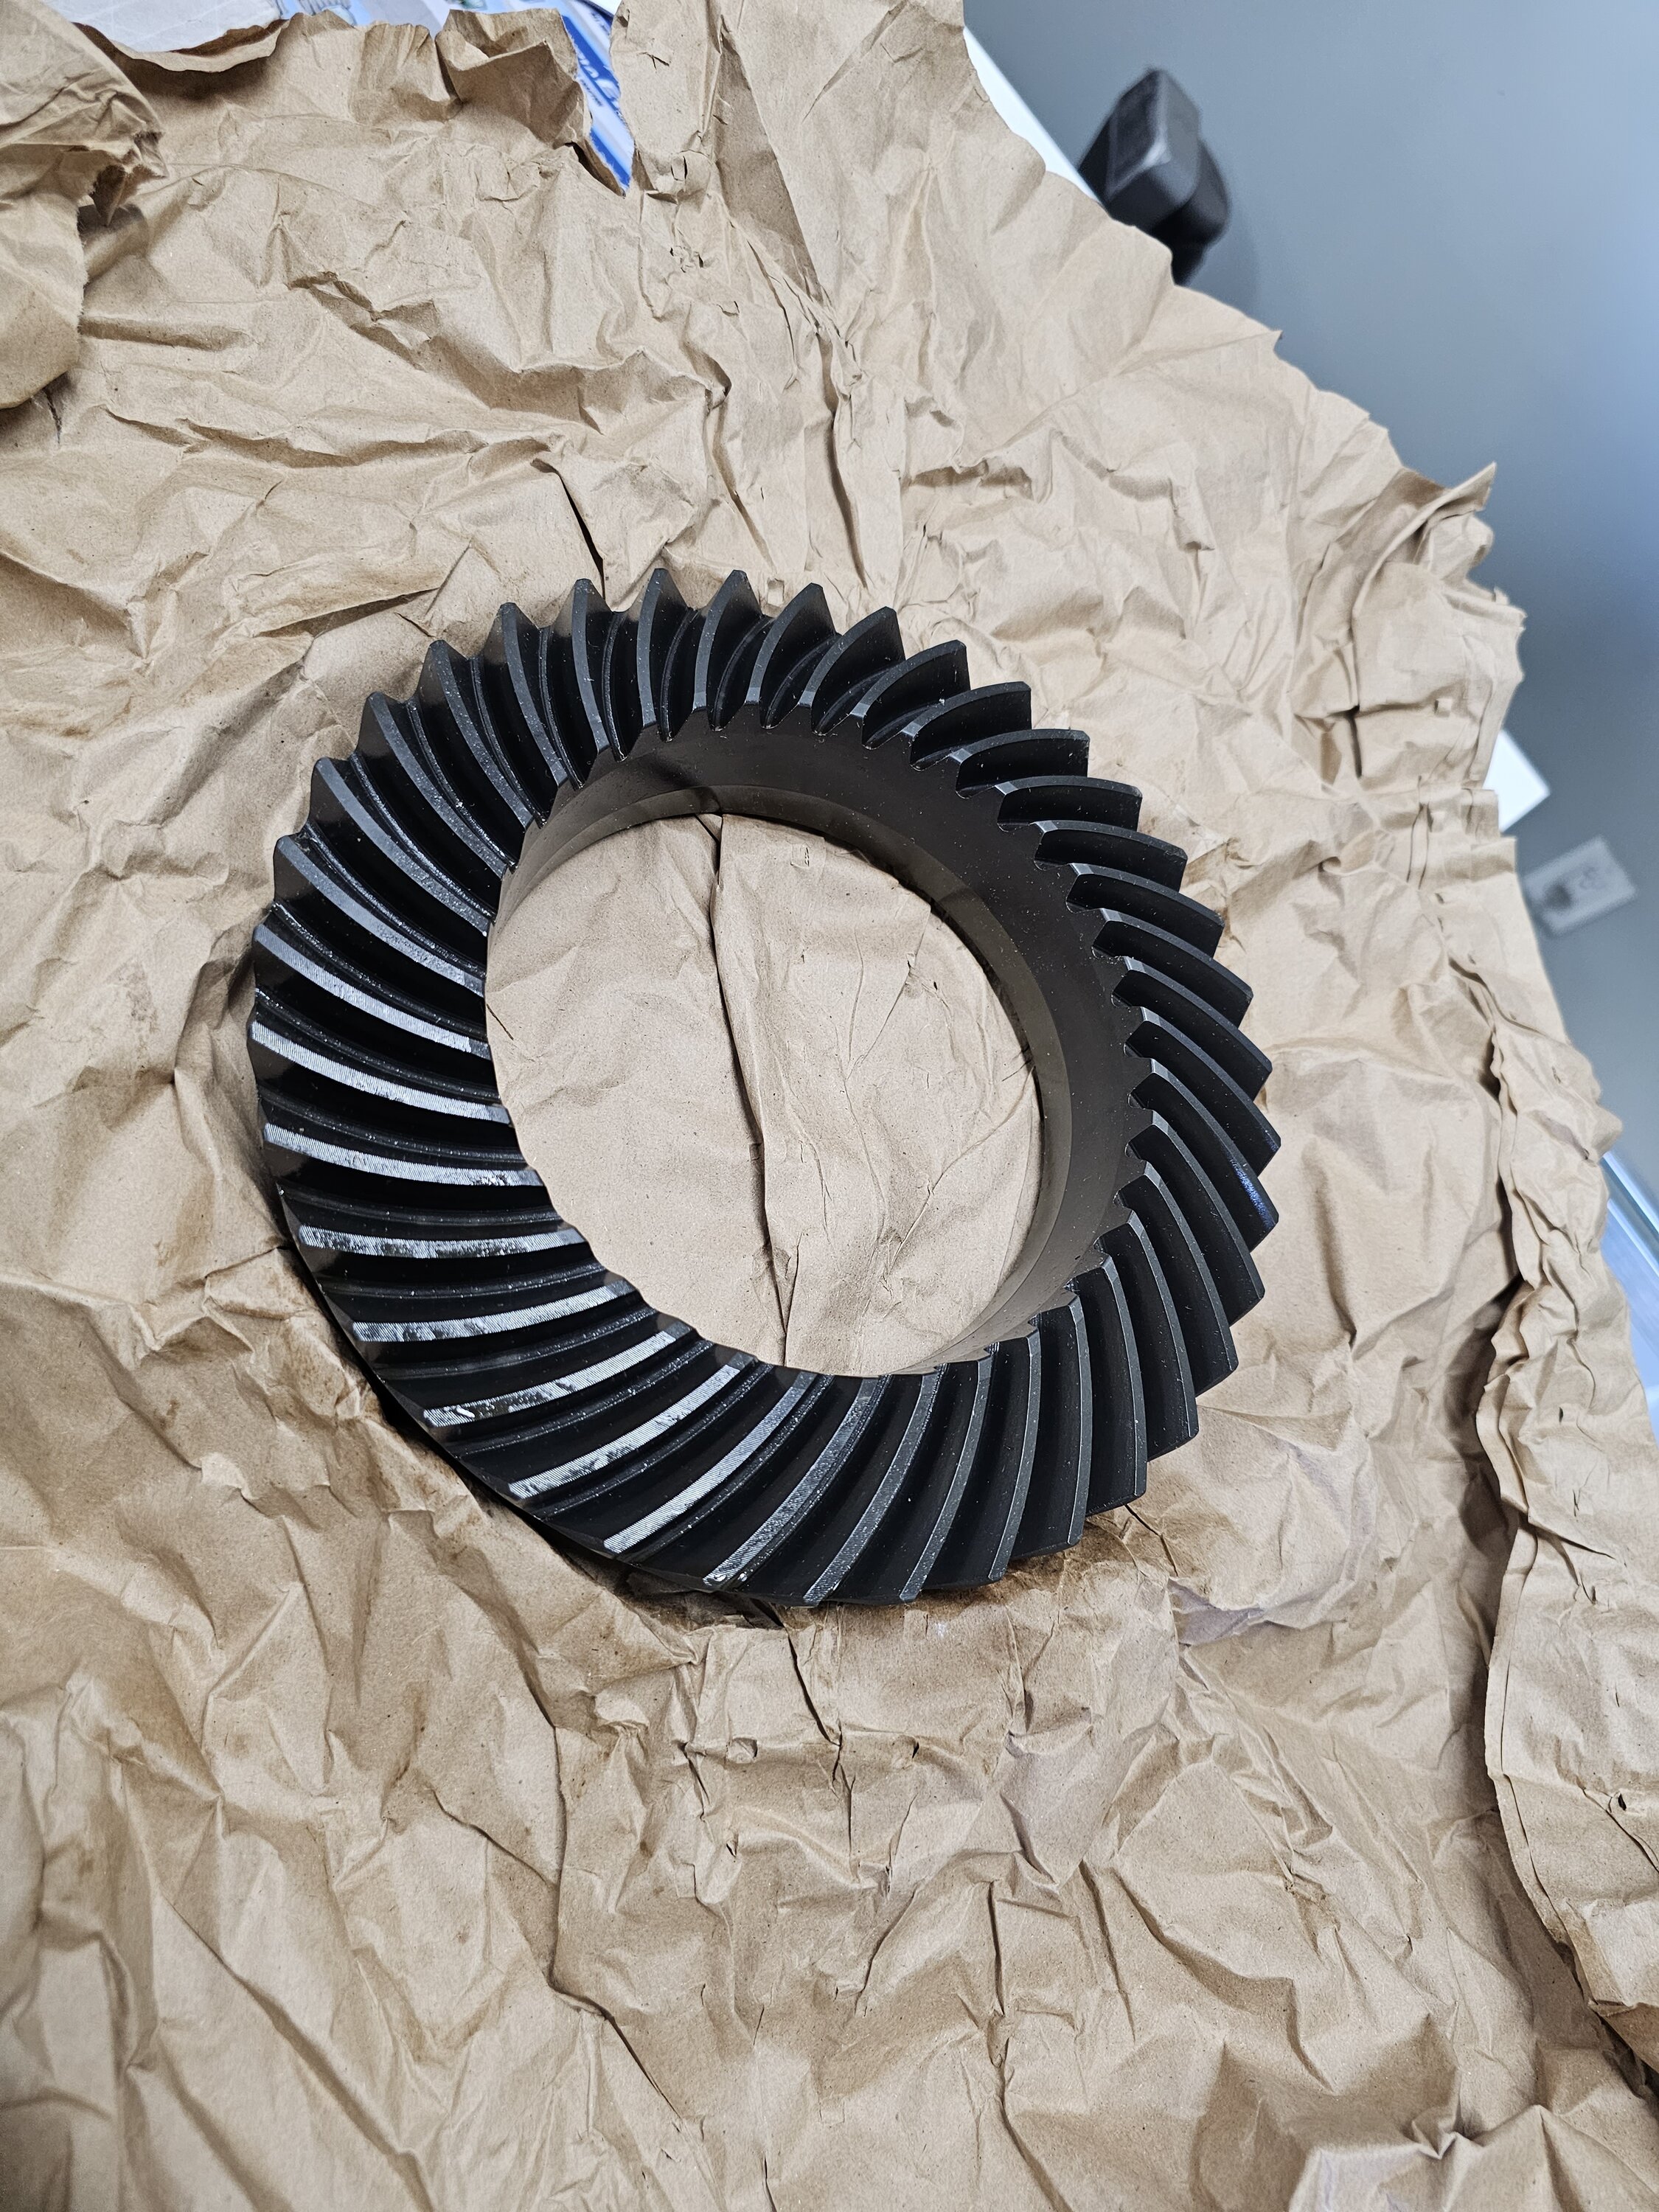 Ford Bronco Nitro Gear 5.29 ring and pinion: Feedback wanted 20231013_094338